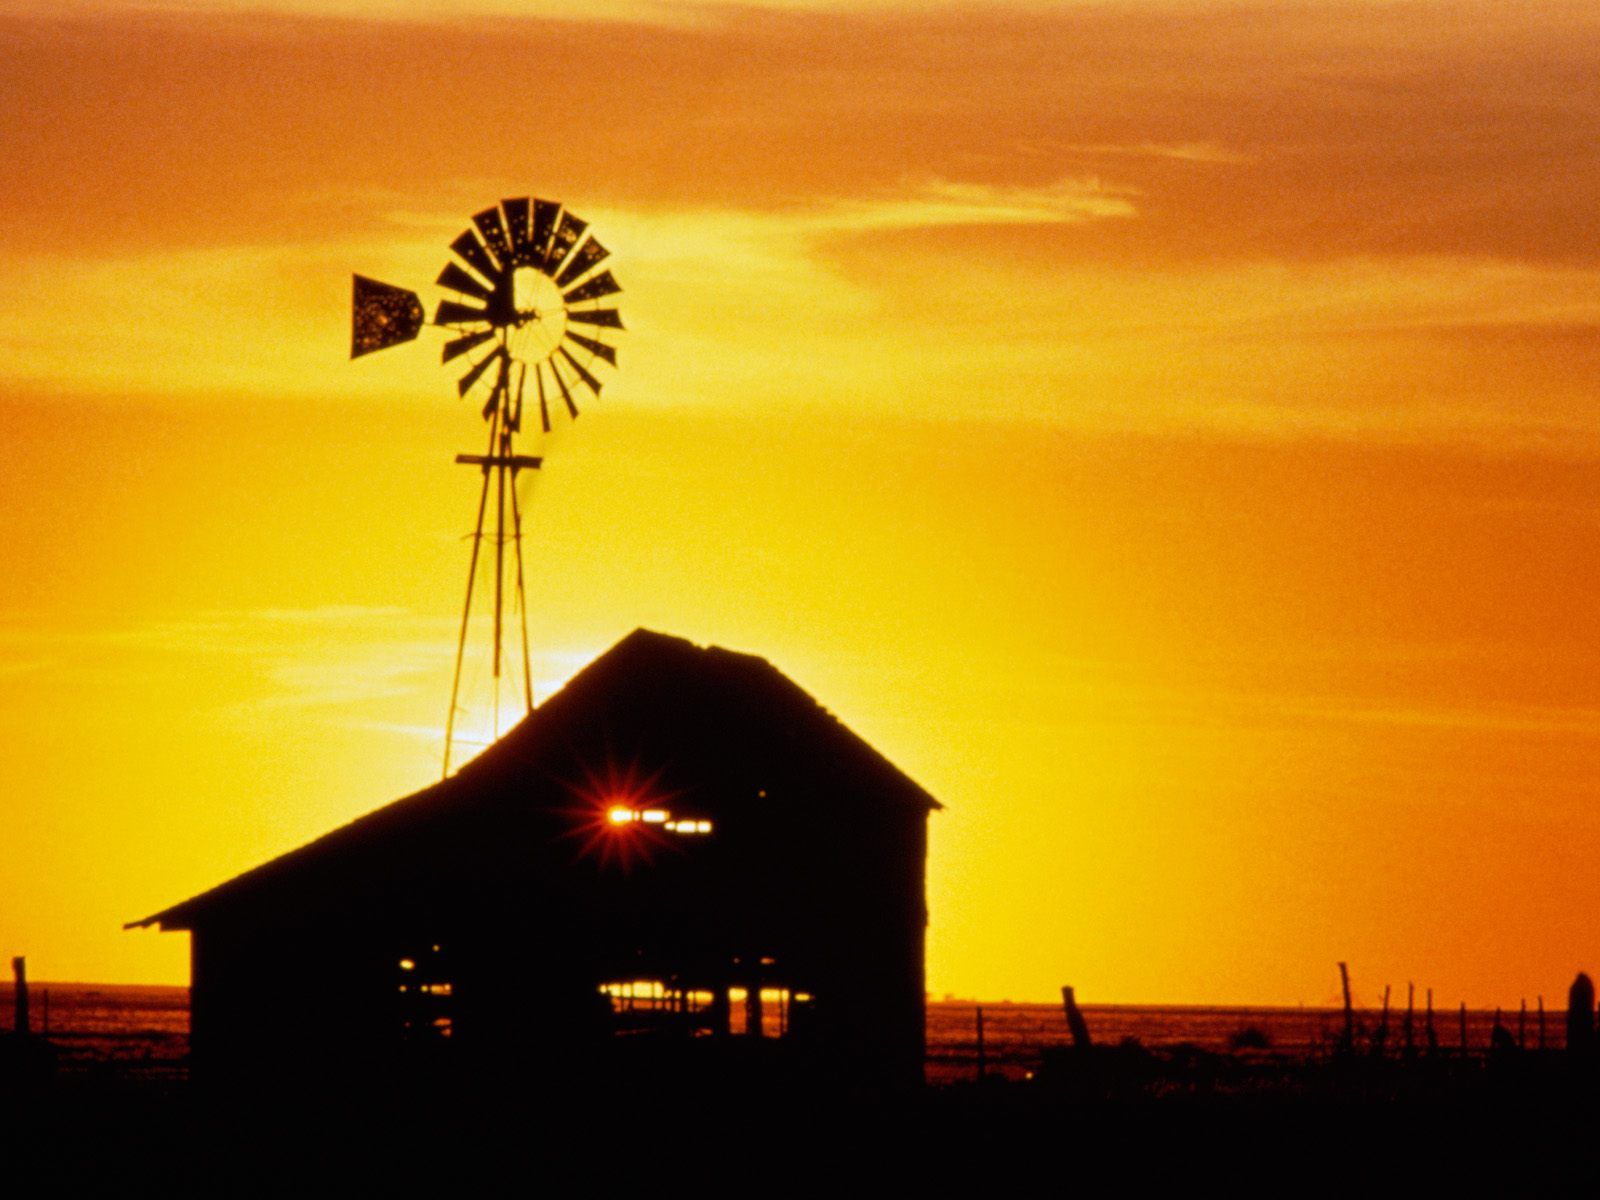 Sunset in the country | Rural Scenes | Pinterest | Barn, Sunset and ...